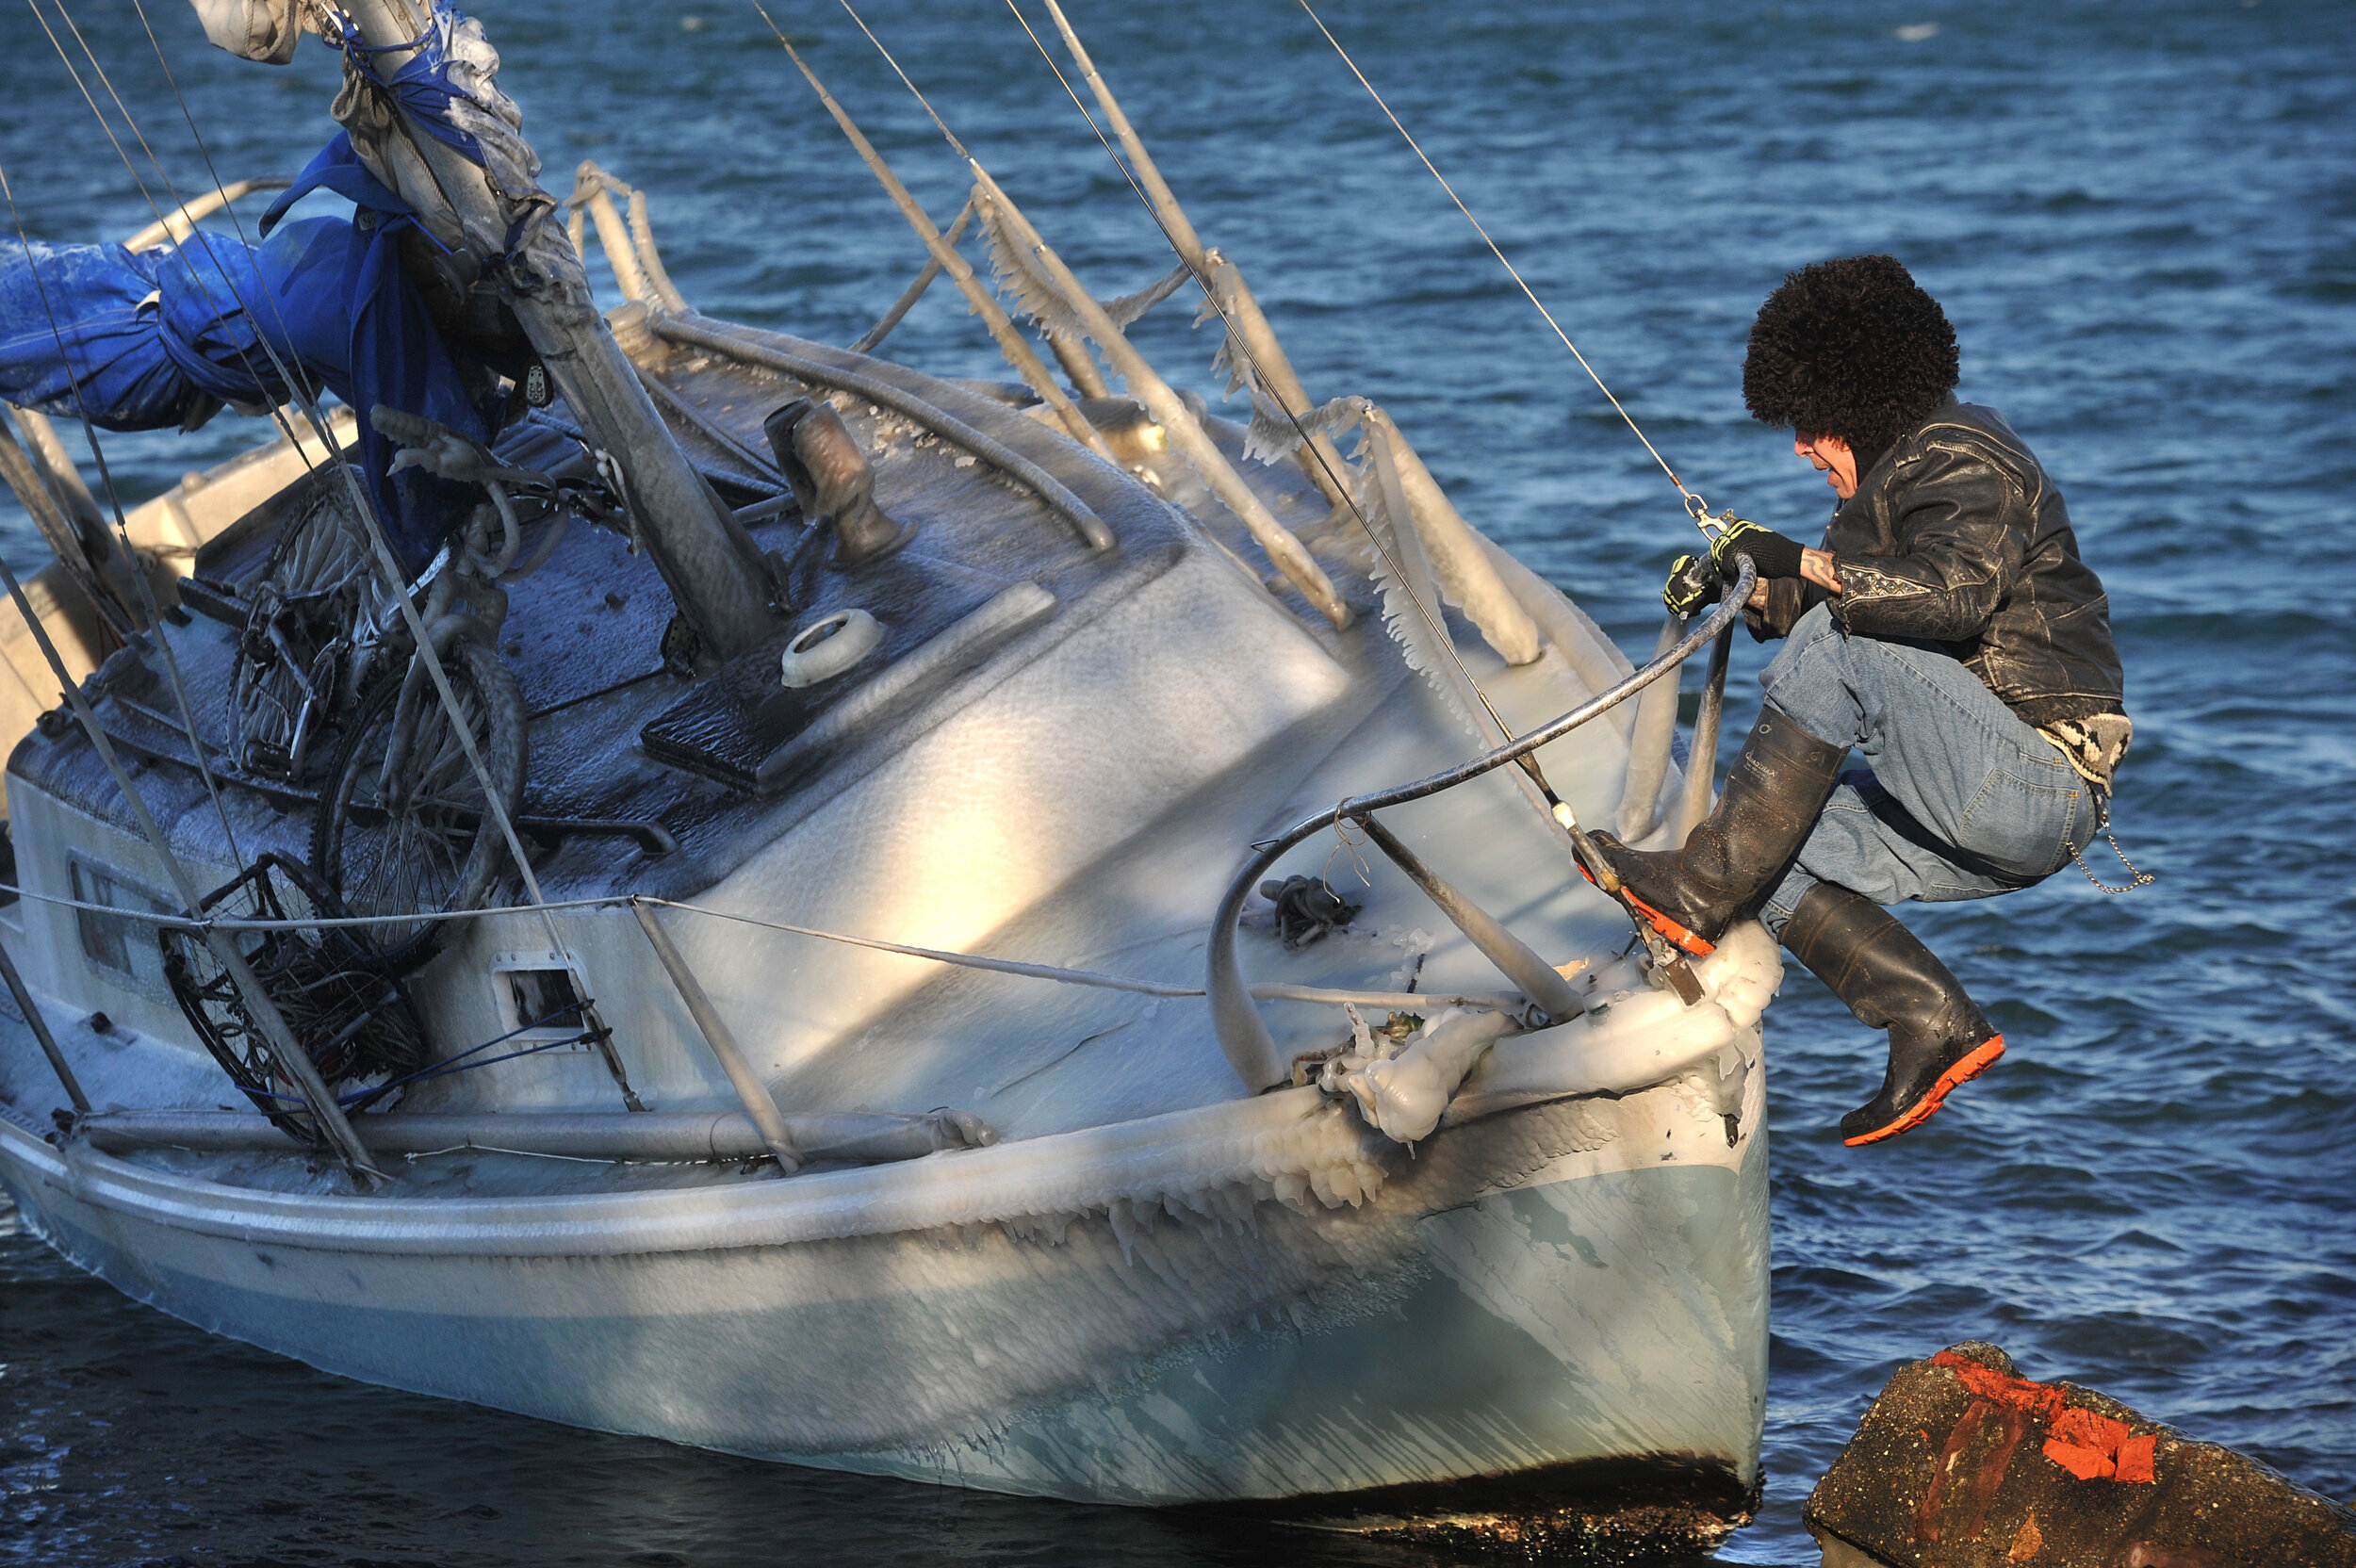  Owner Roger Coderre climbs on to the front of his boat Tuesday morning, Nov. 23, after he learned it came ashore due to high winds the previous night. Coderre said there was no damage to the boat and wasn't taking on water so he tied it to a nearby 